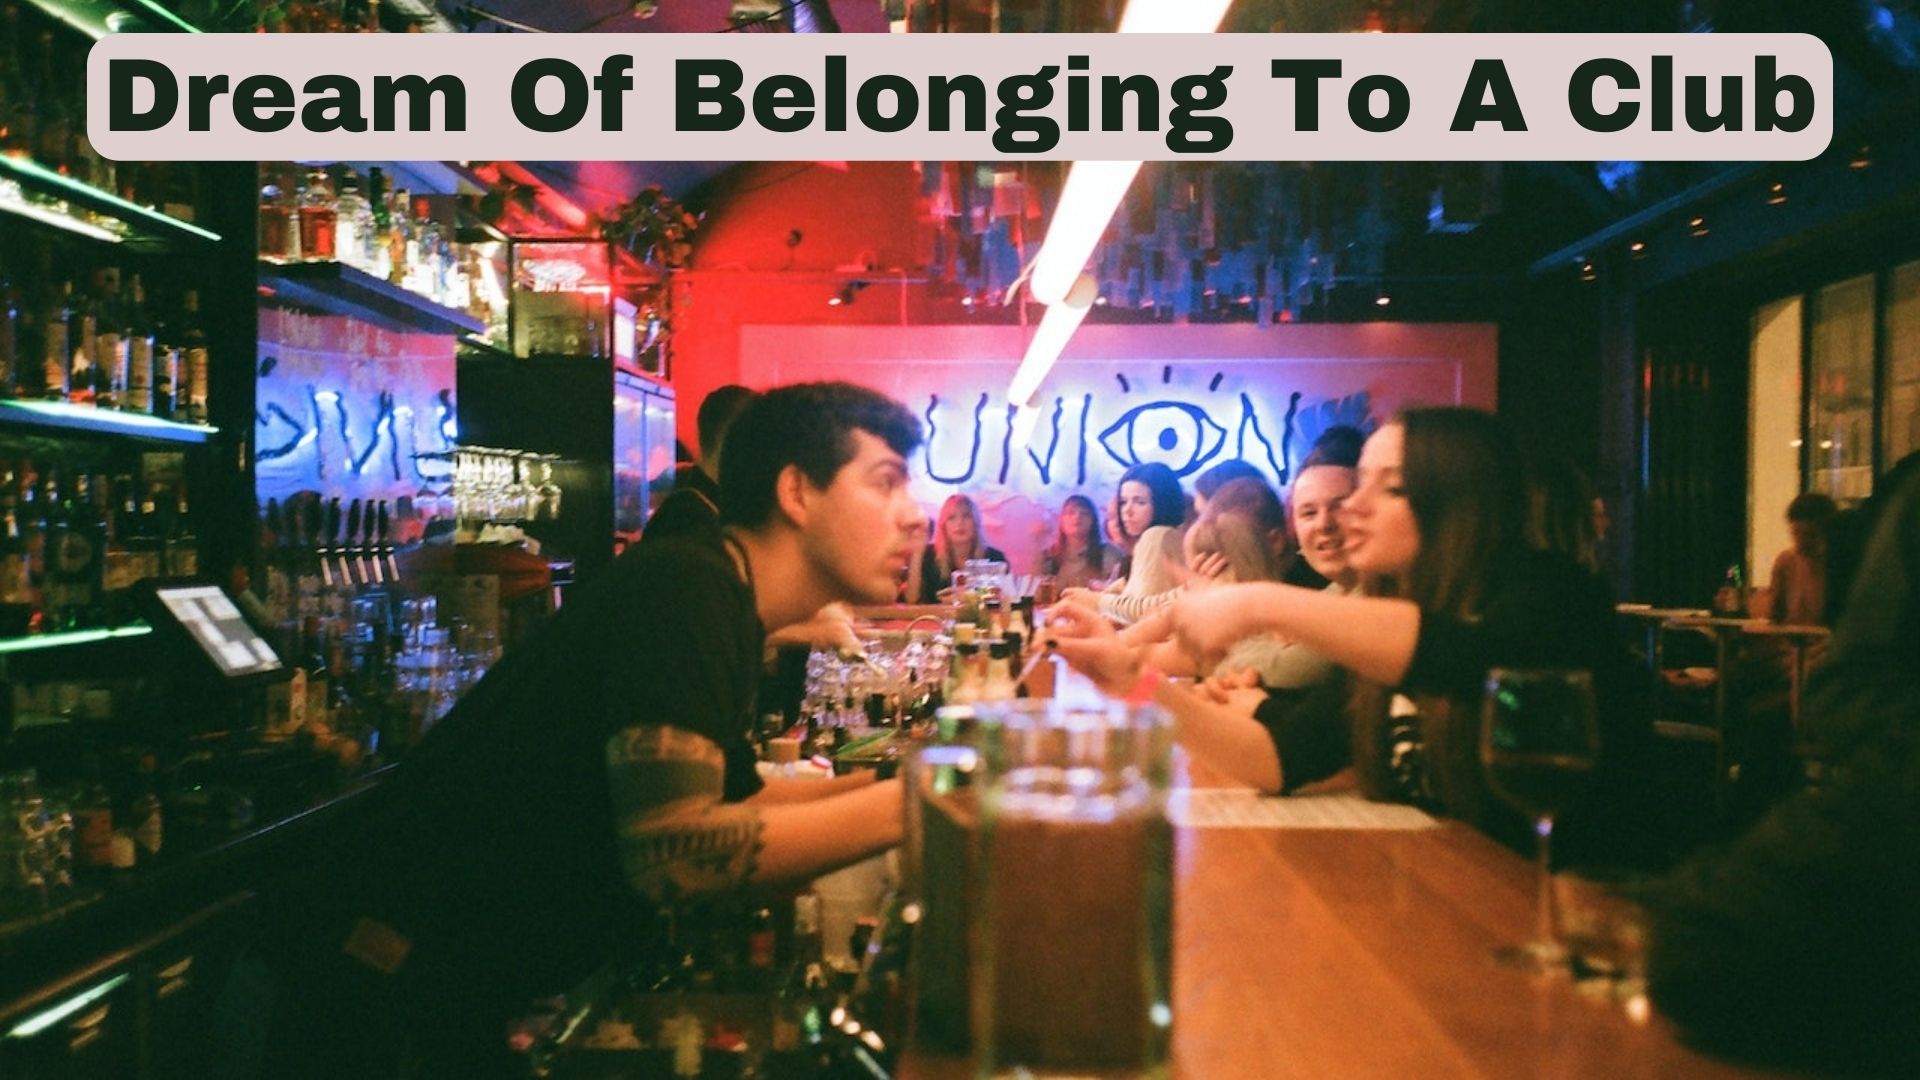 Dream Of Belonging To A Club - What Does It Mean?